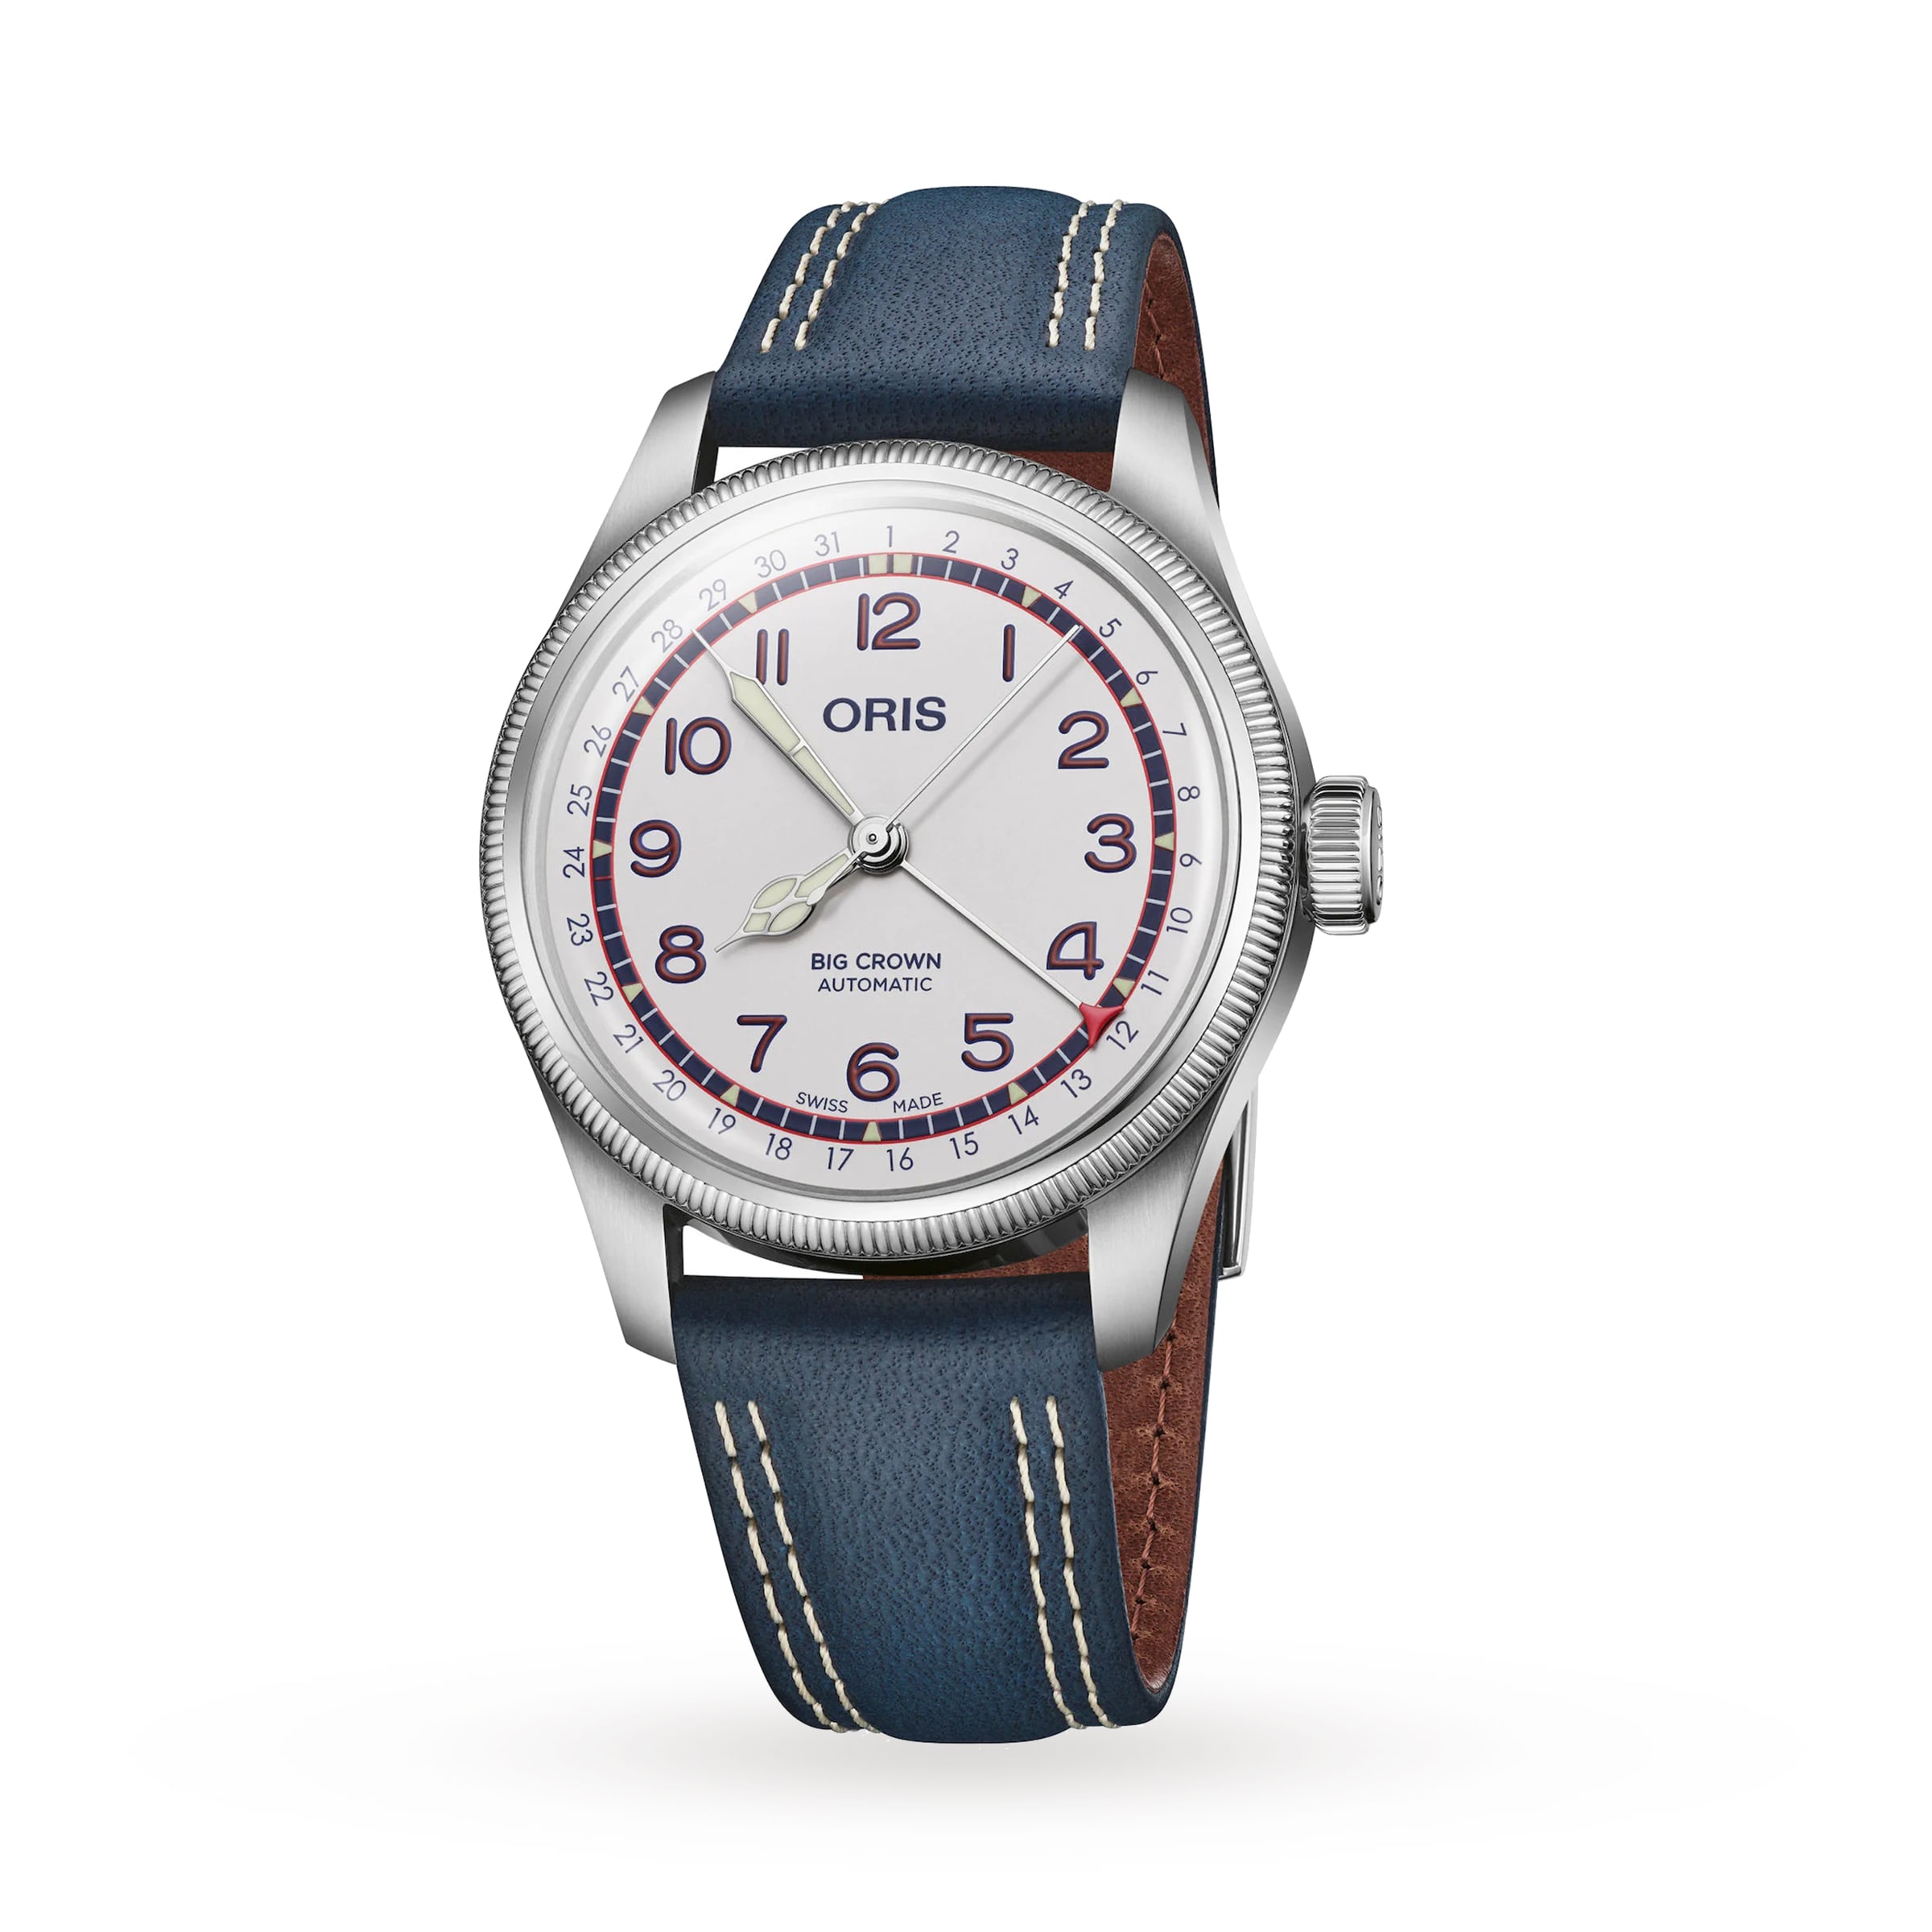 Hank Aaron Limited Edition 40mm Mens Watch